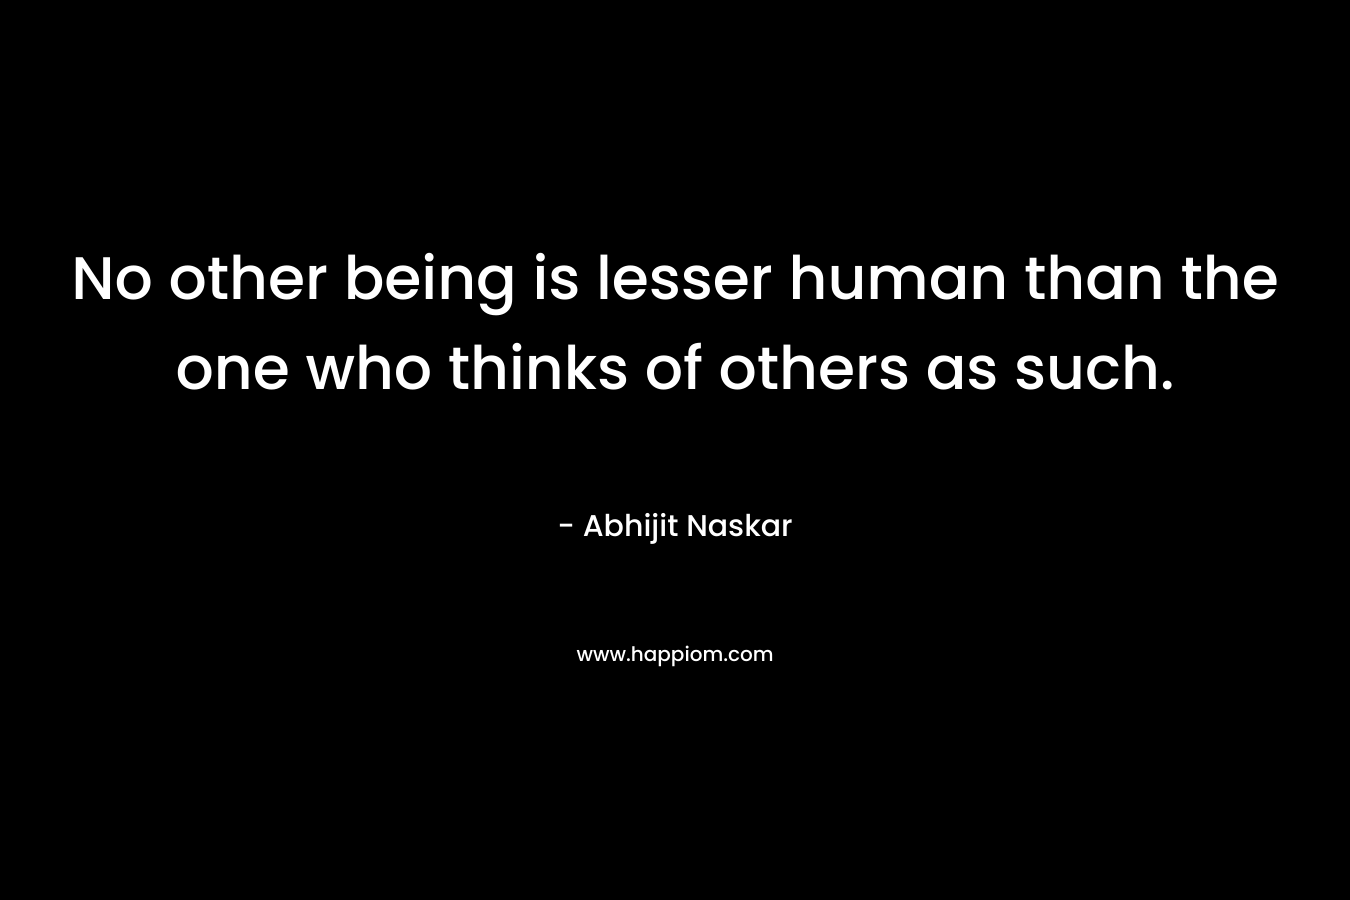 No other being is lesser human than the one who thinks of others as such.